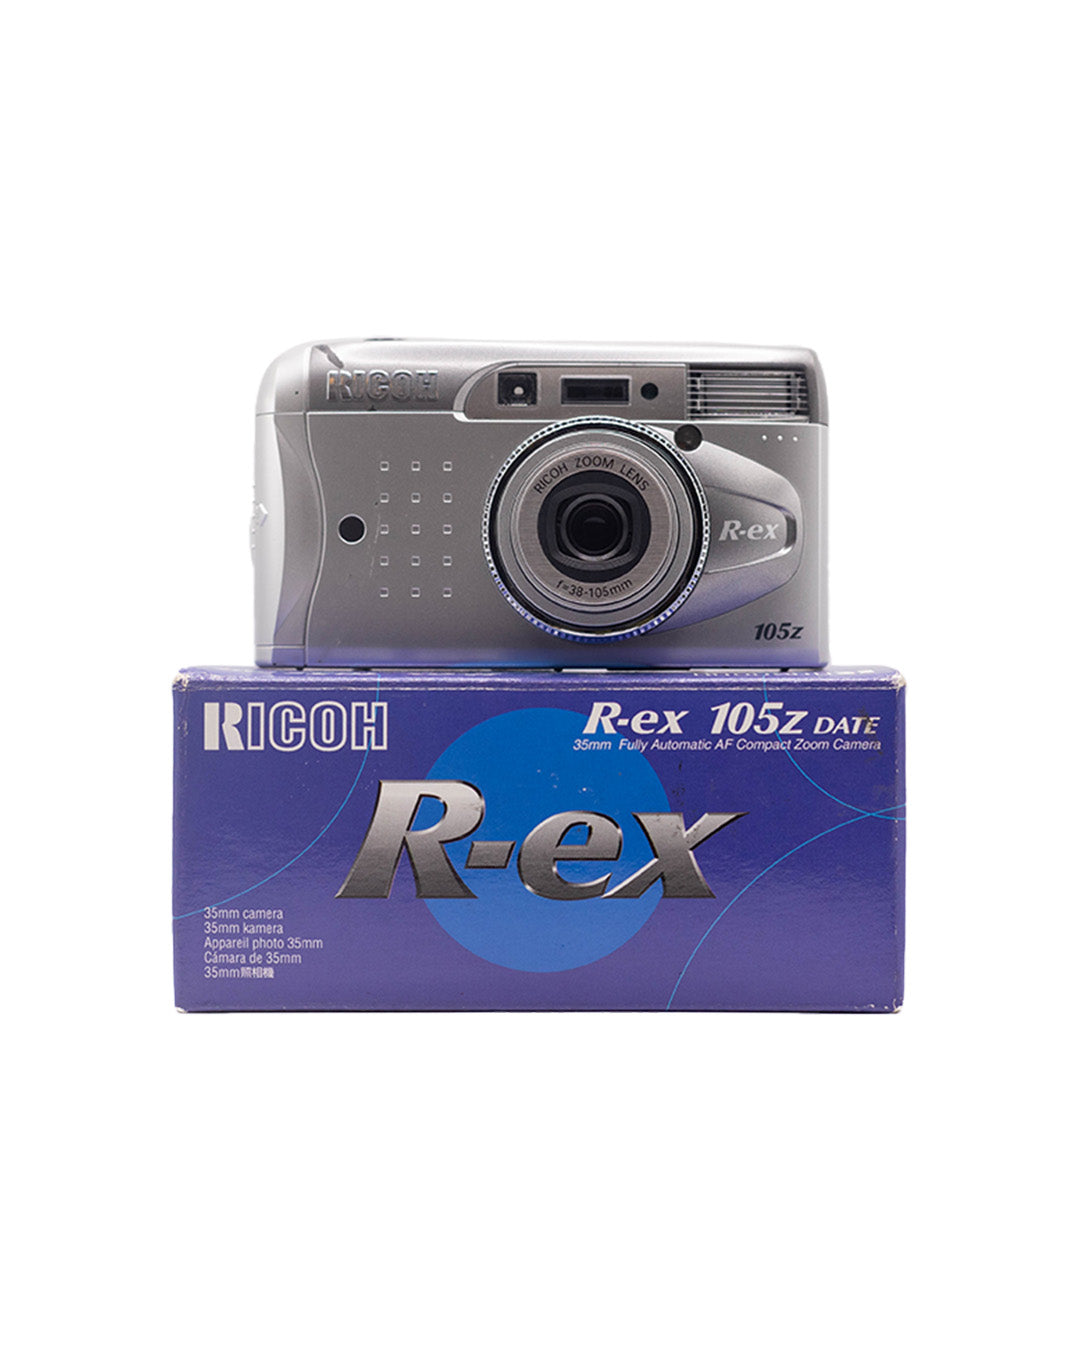 *NEW Ricoh R-ex 105z Date 35mm Point & Shoot Camera with 38-105mm with f/4.8-12.3 lens